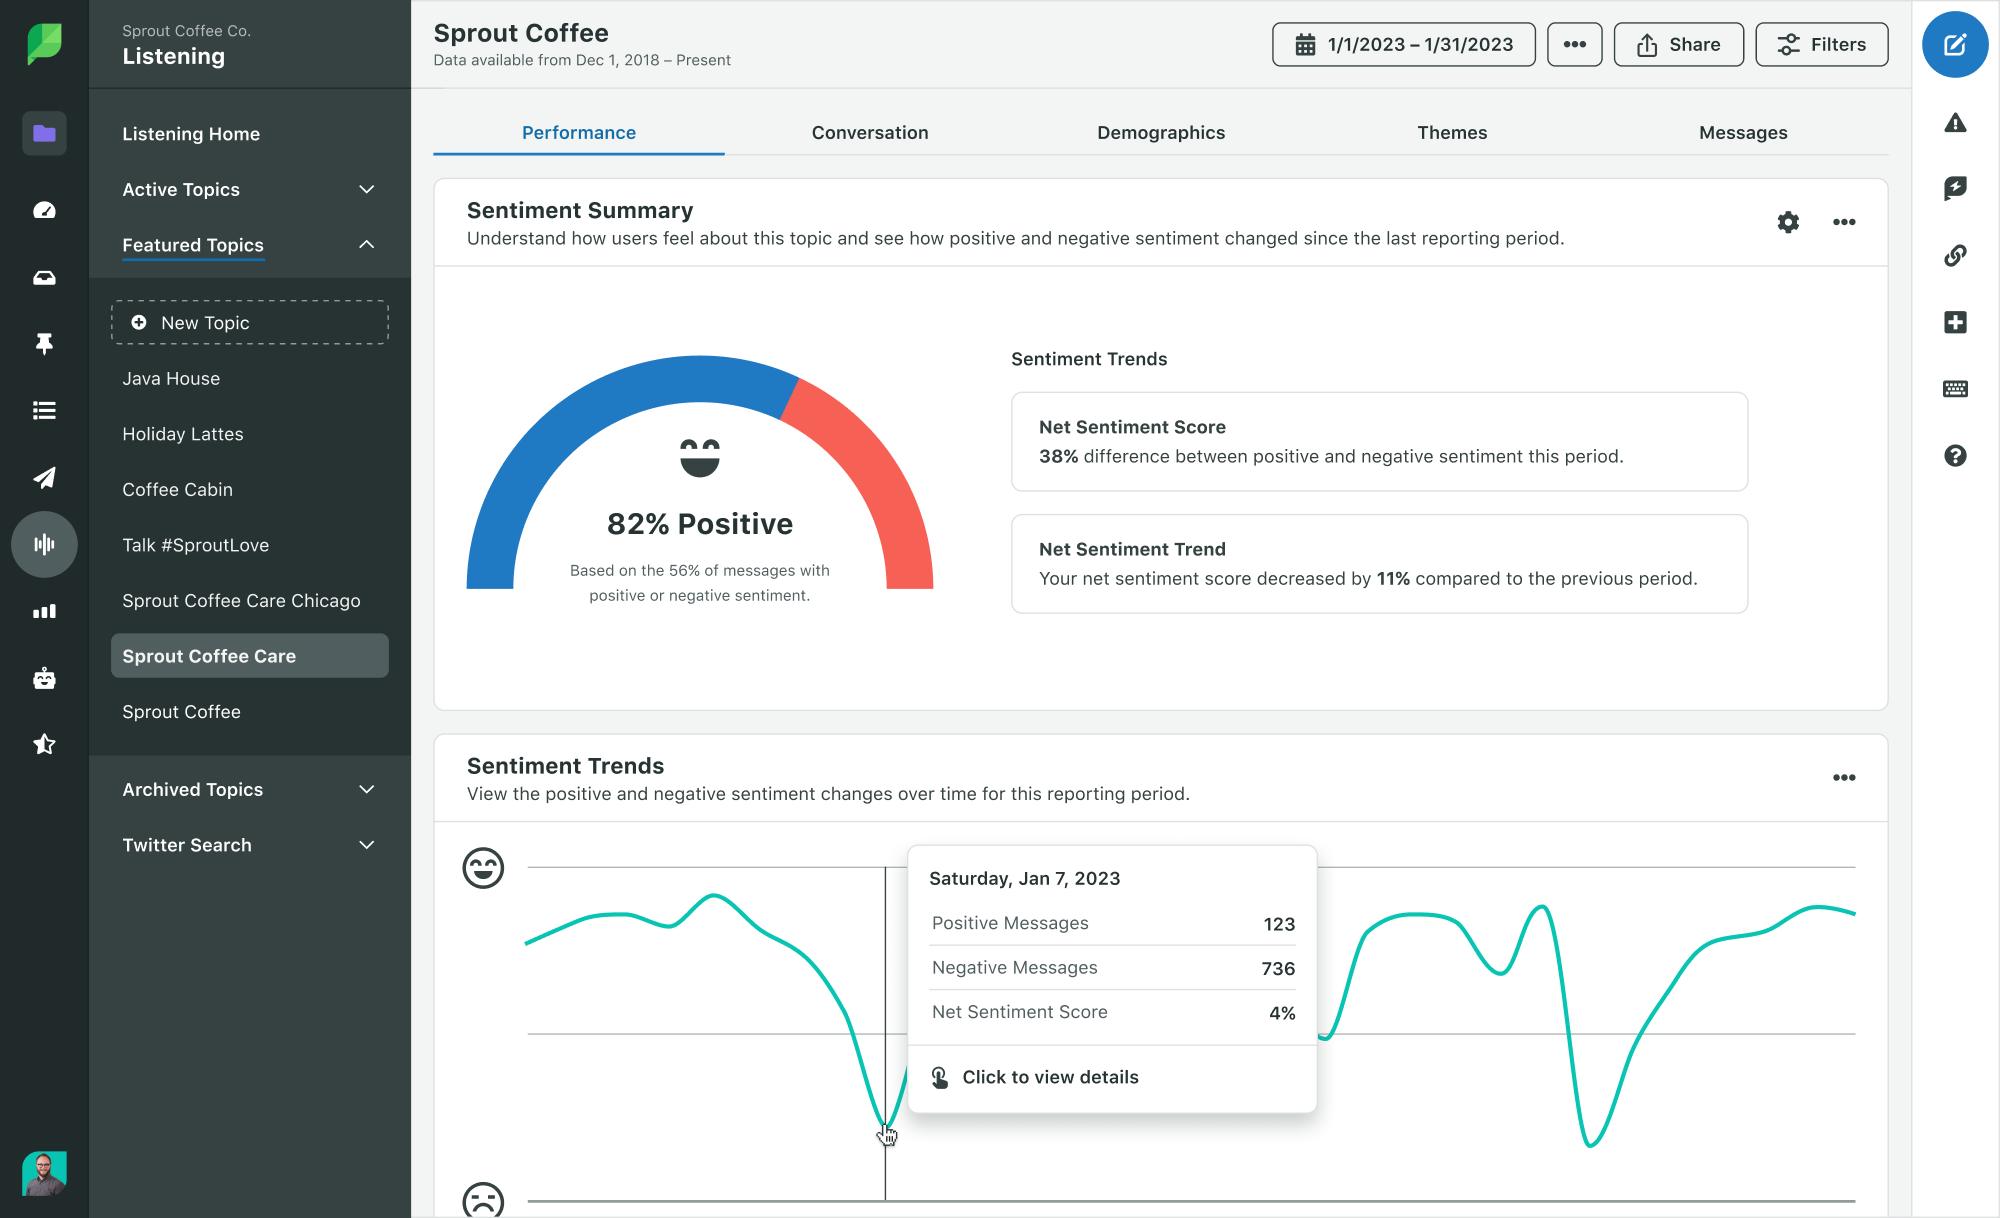 Screenshot of Sprout Social’s sentiment analysis tools showing negative and positive sentiment scores and identifying sentiment trends across timelines